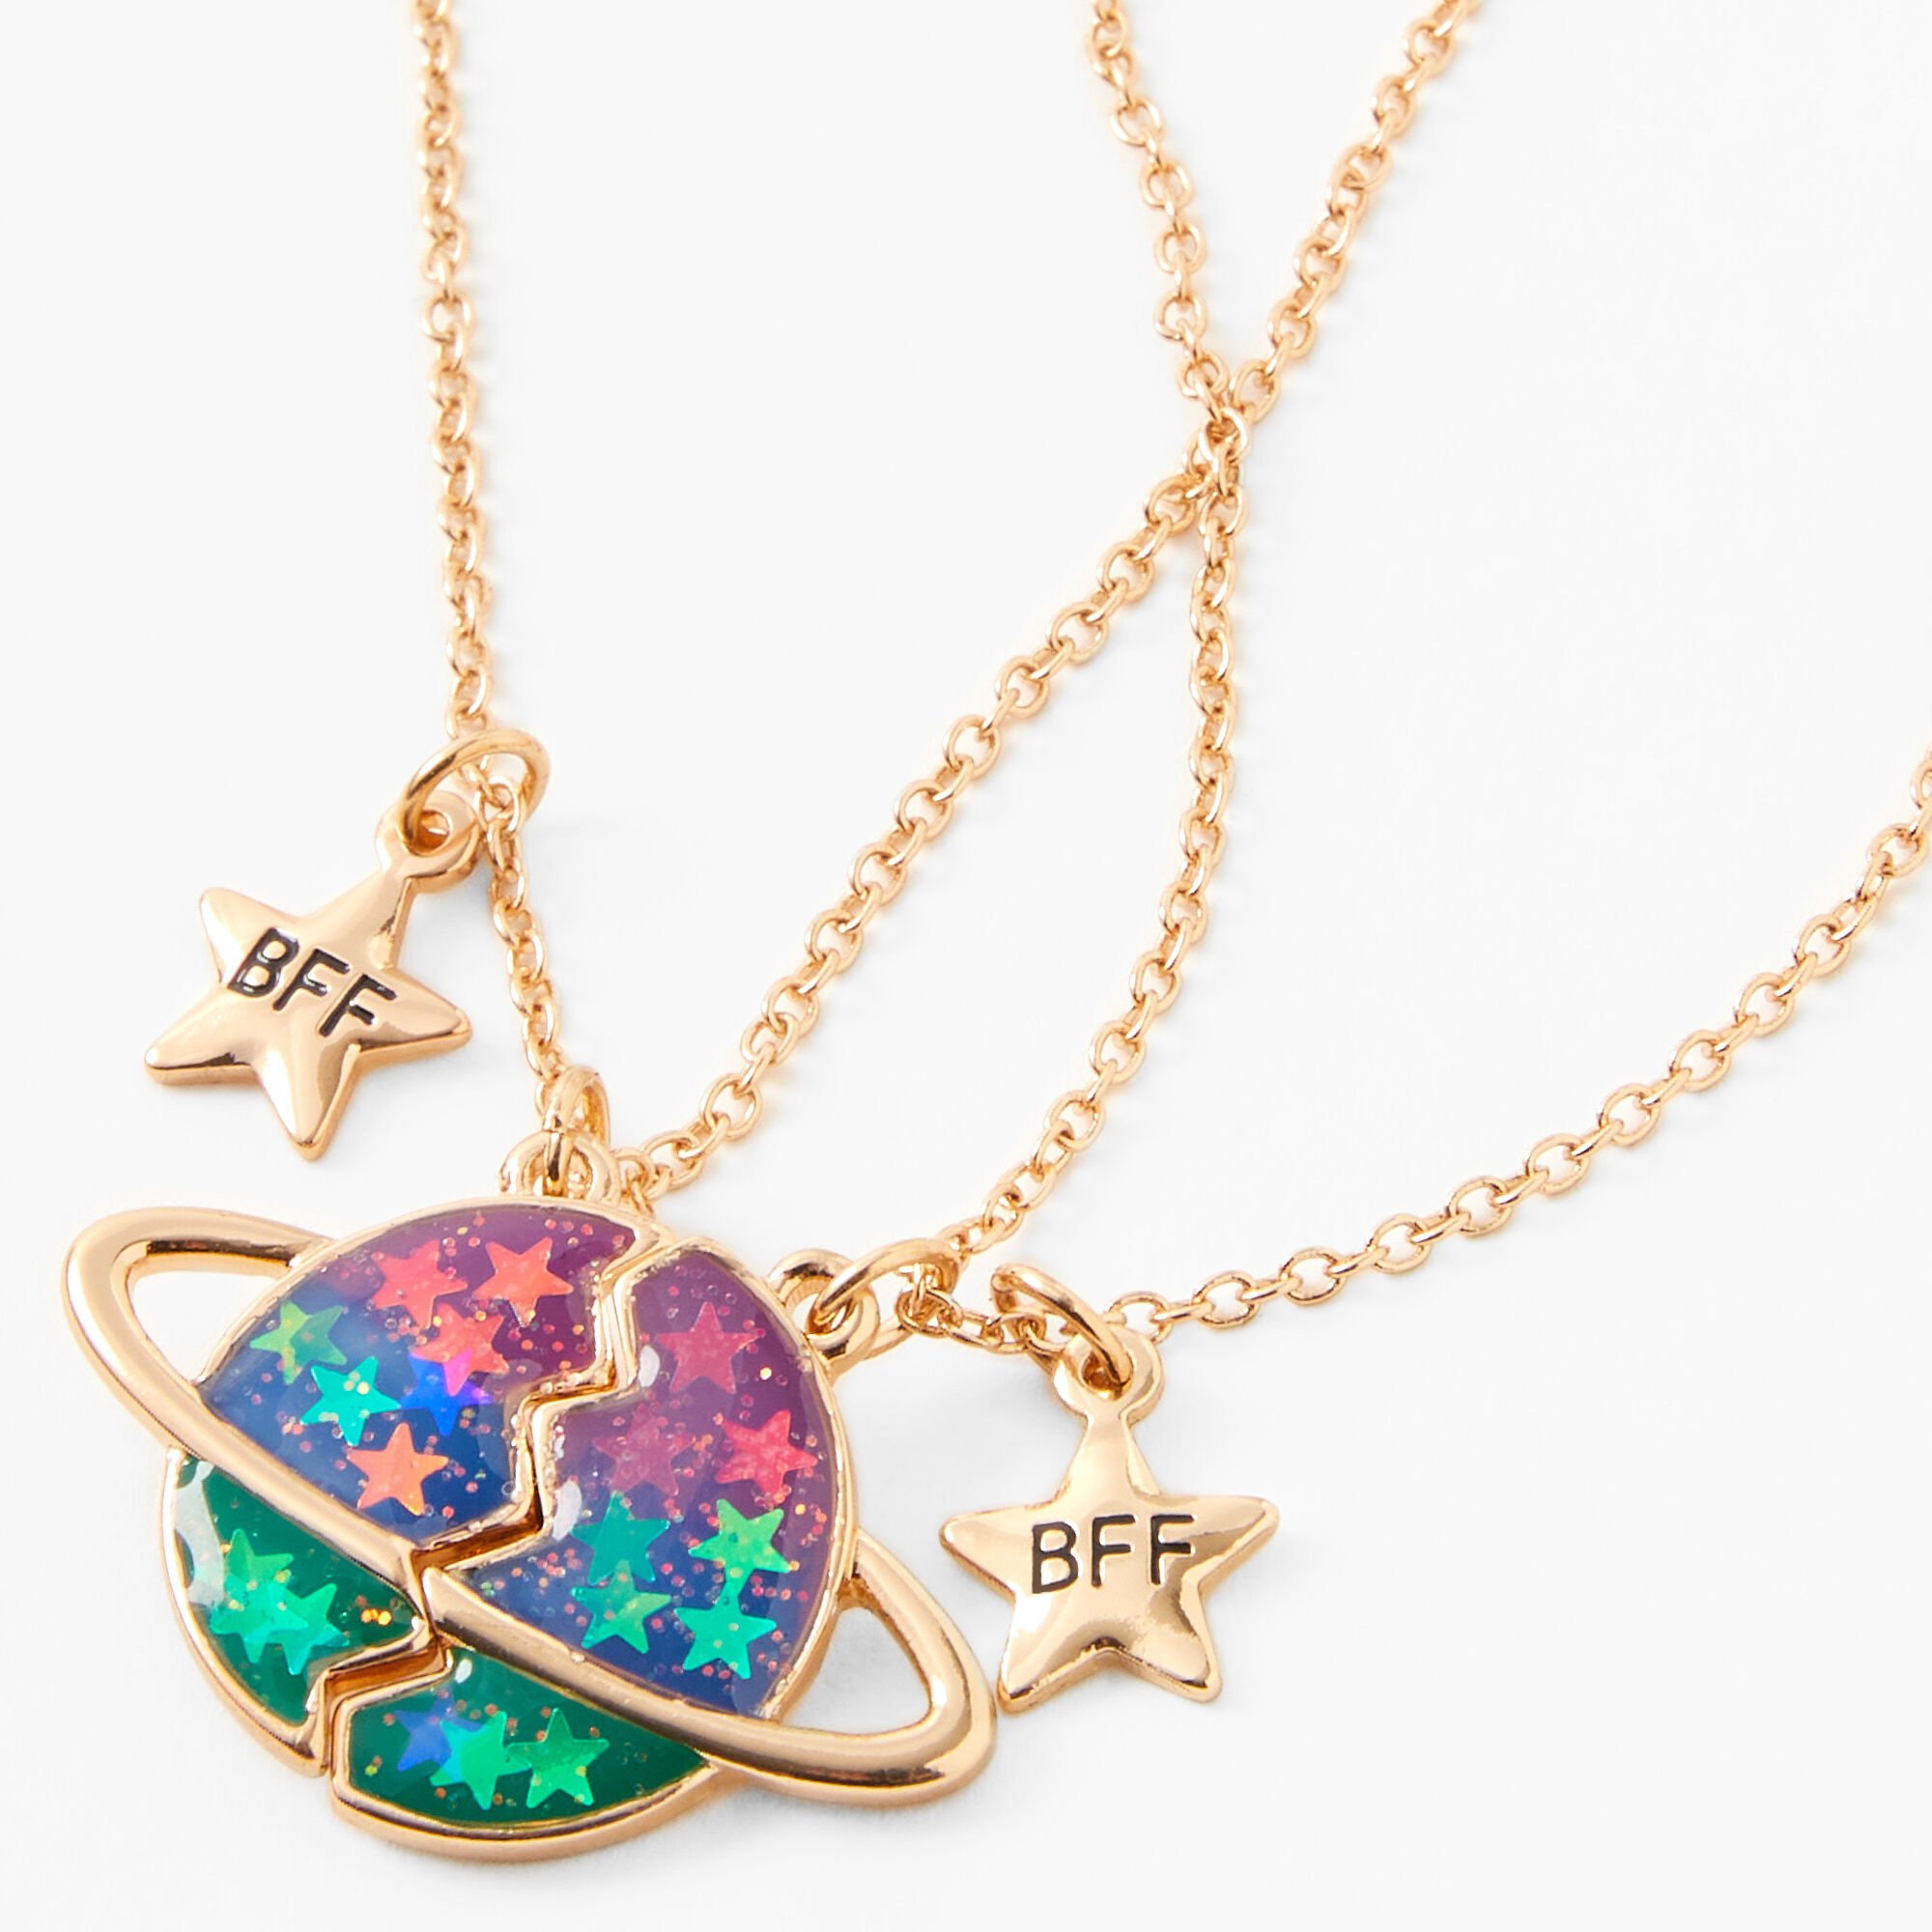 View Claires Best Friends Glow In The Dark Outer Space Split Pendant Necklaces 2 Pack Gold information